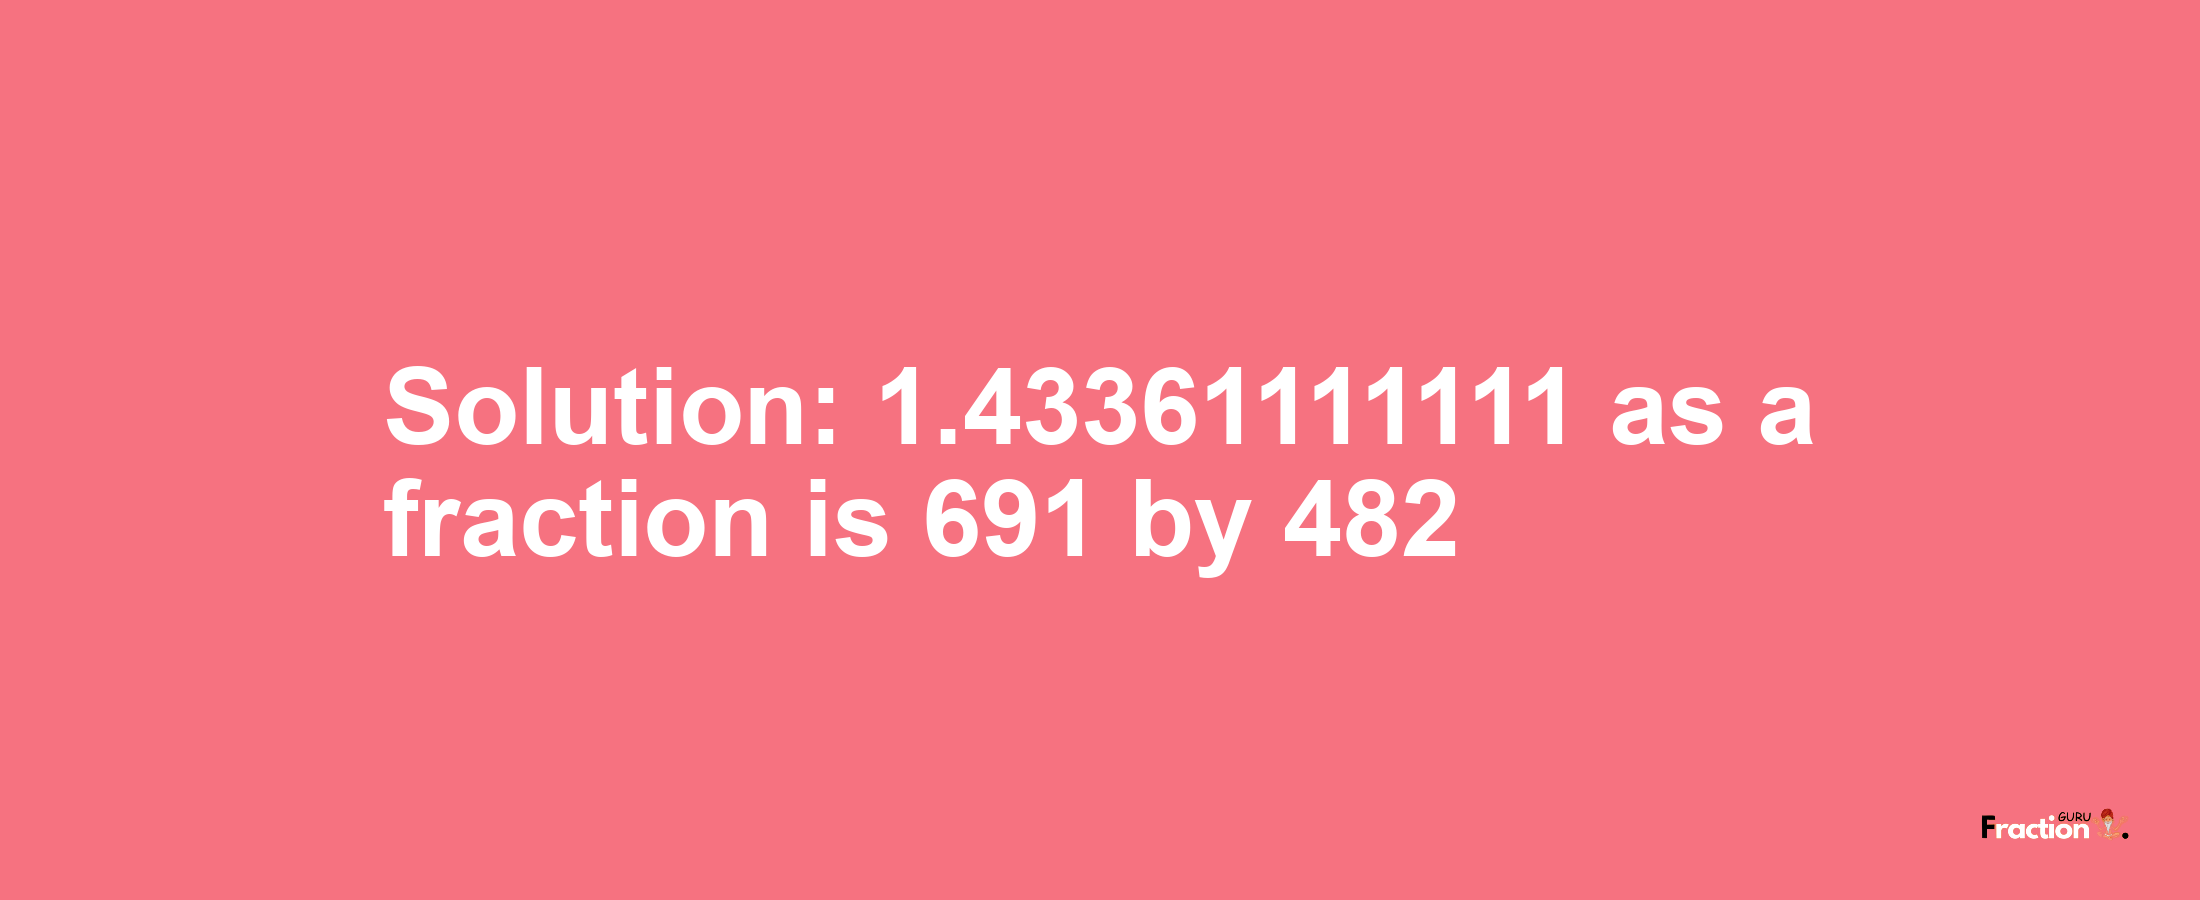 Solution:1.43361111111 as a fraction is 691/482